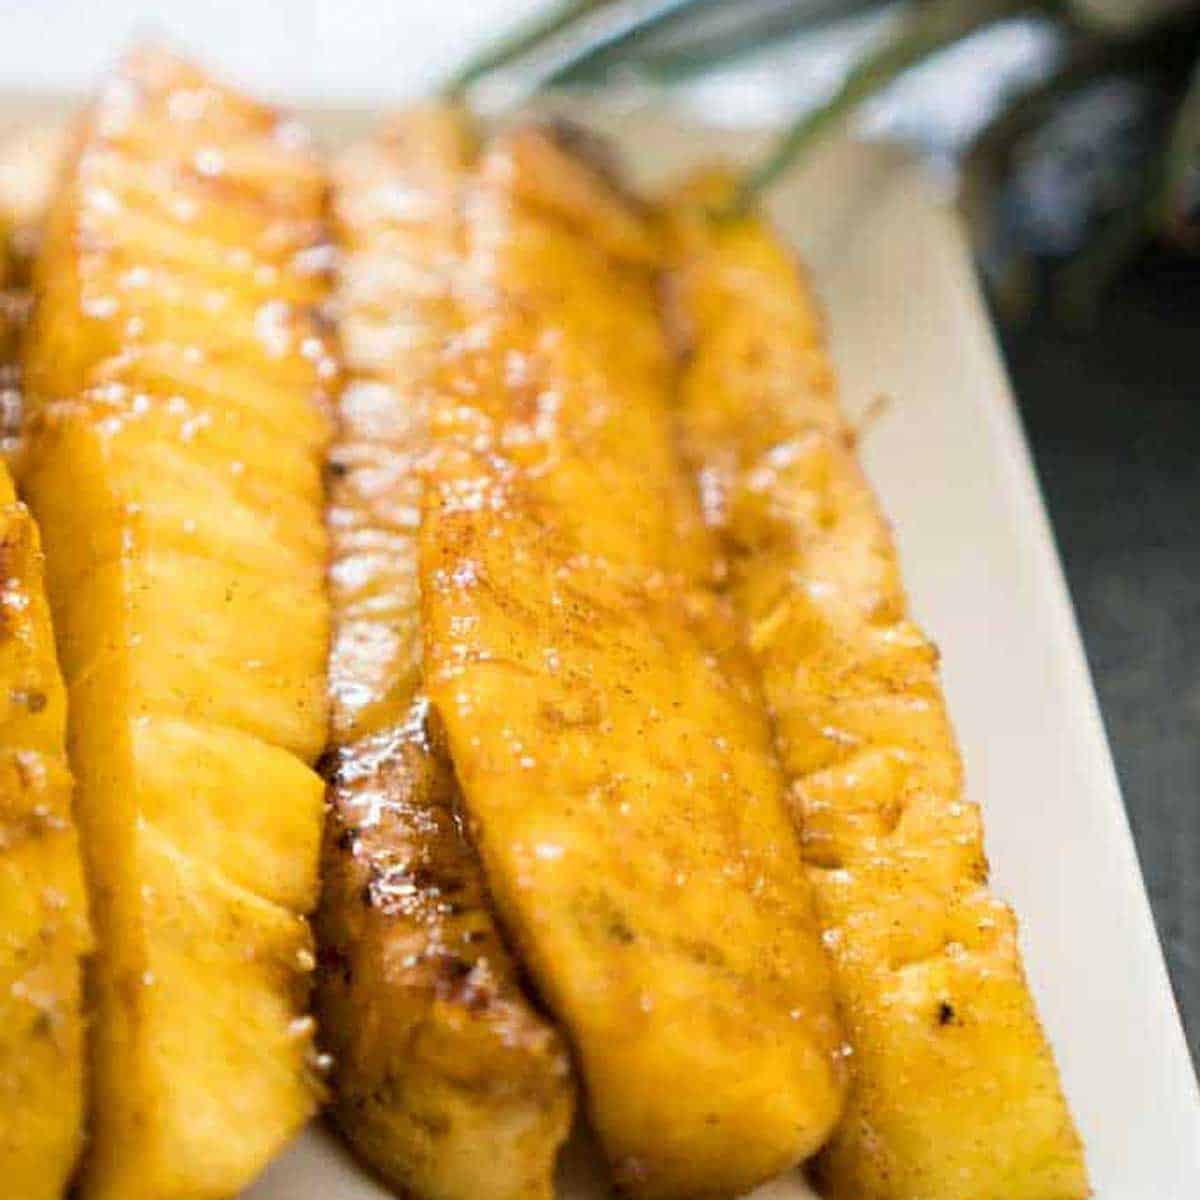 grilled pineapple spears on white plate